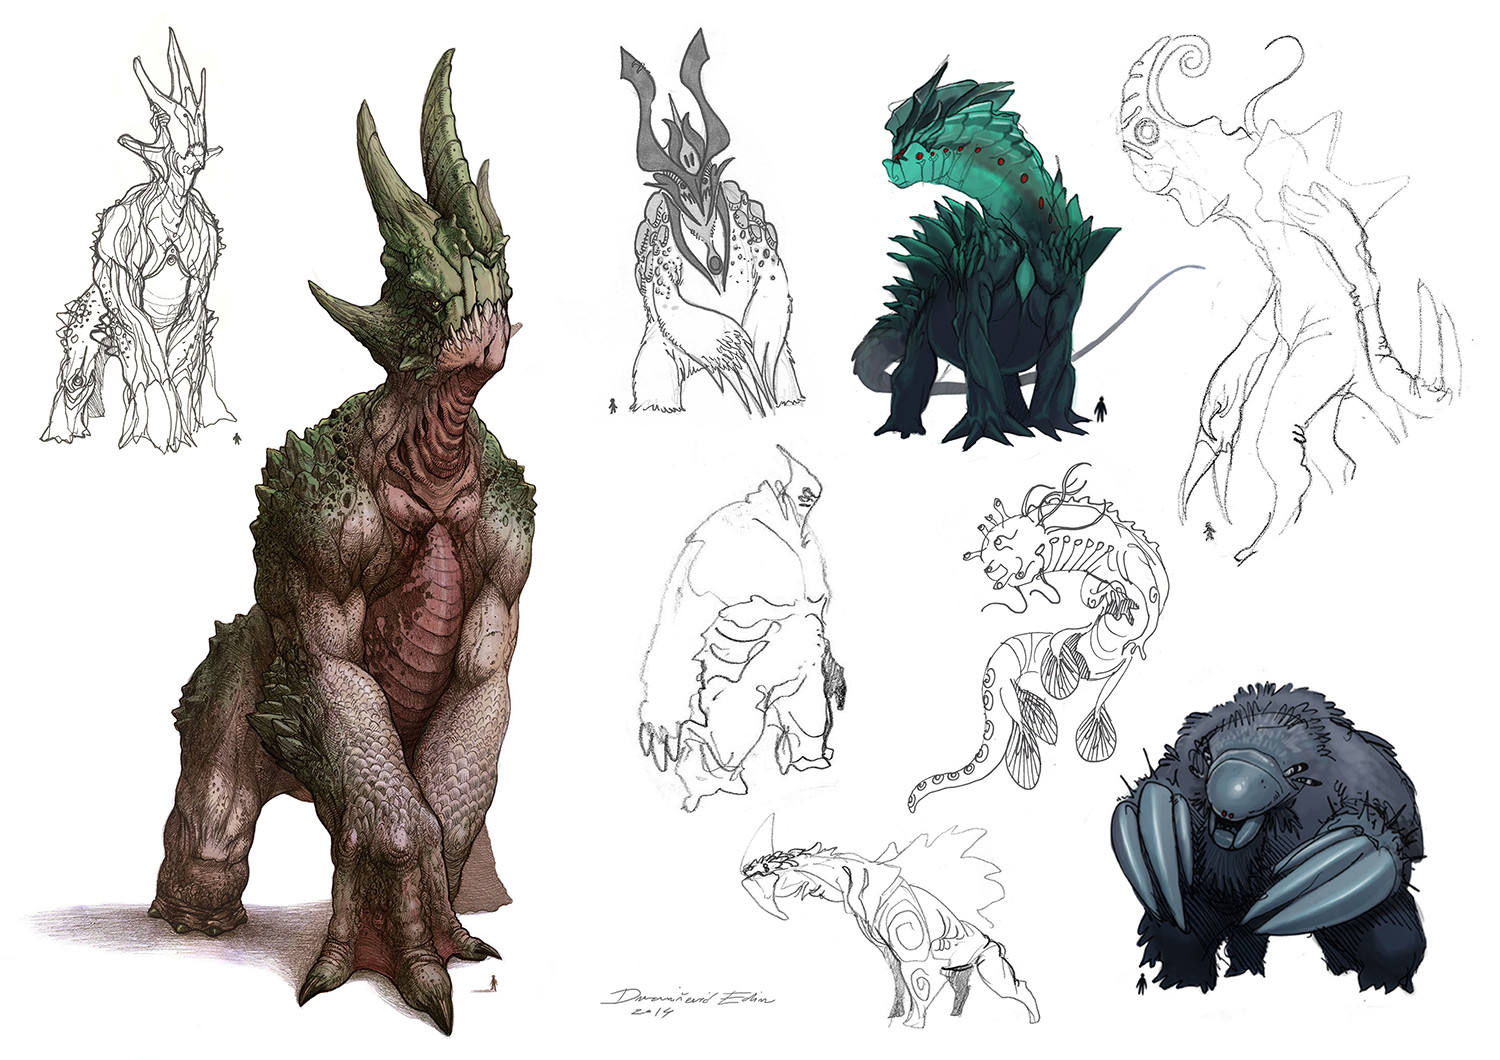 Different explorations of the creature